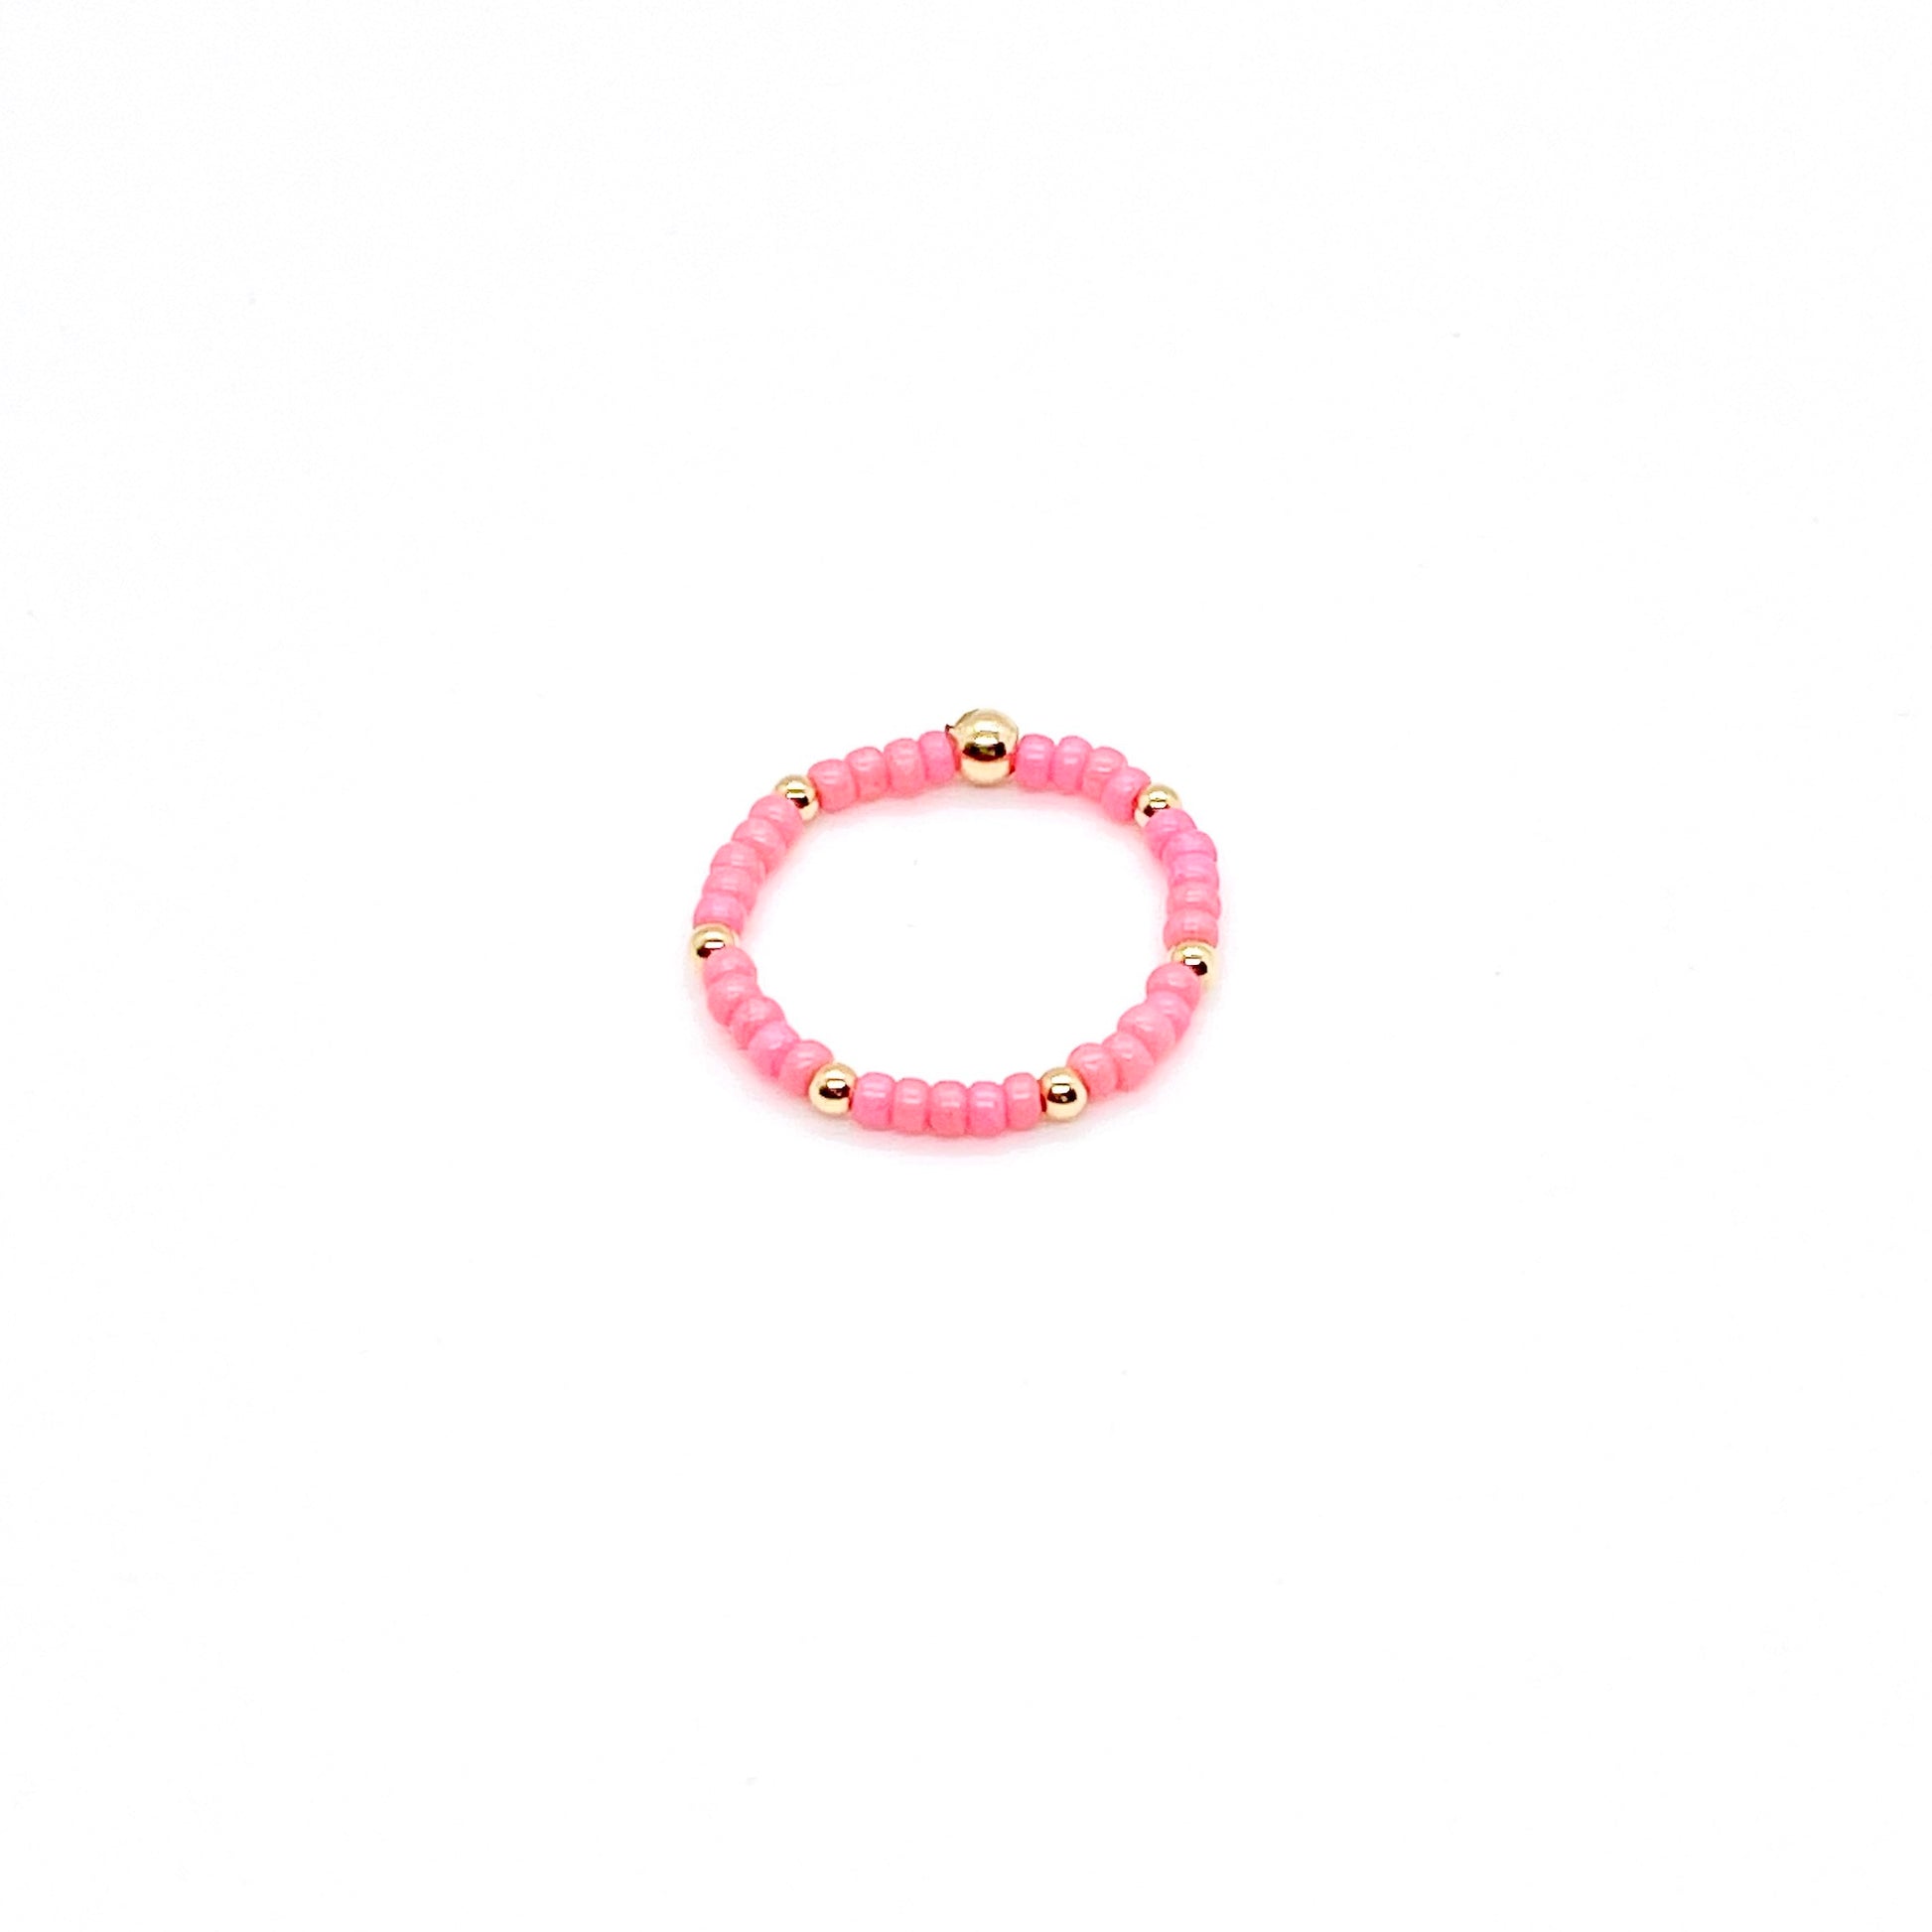 Stretch ring with pink seed beads and 2mm 14k gold-fill waterproof accent ball beads.